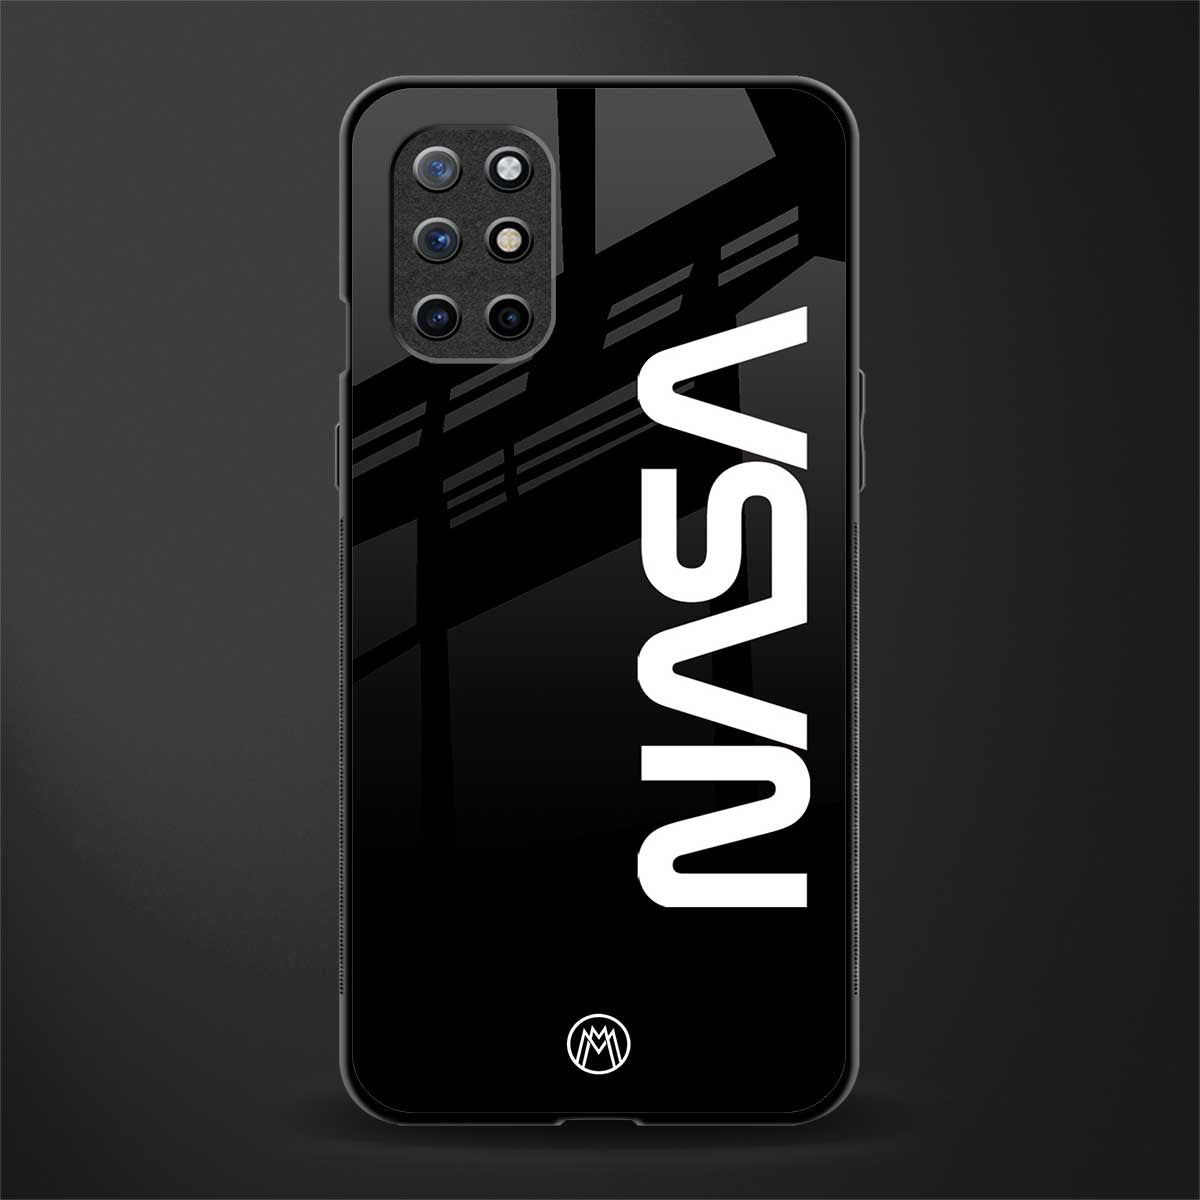 nasa black glass case for oneplus 8t image